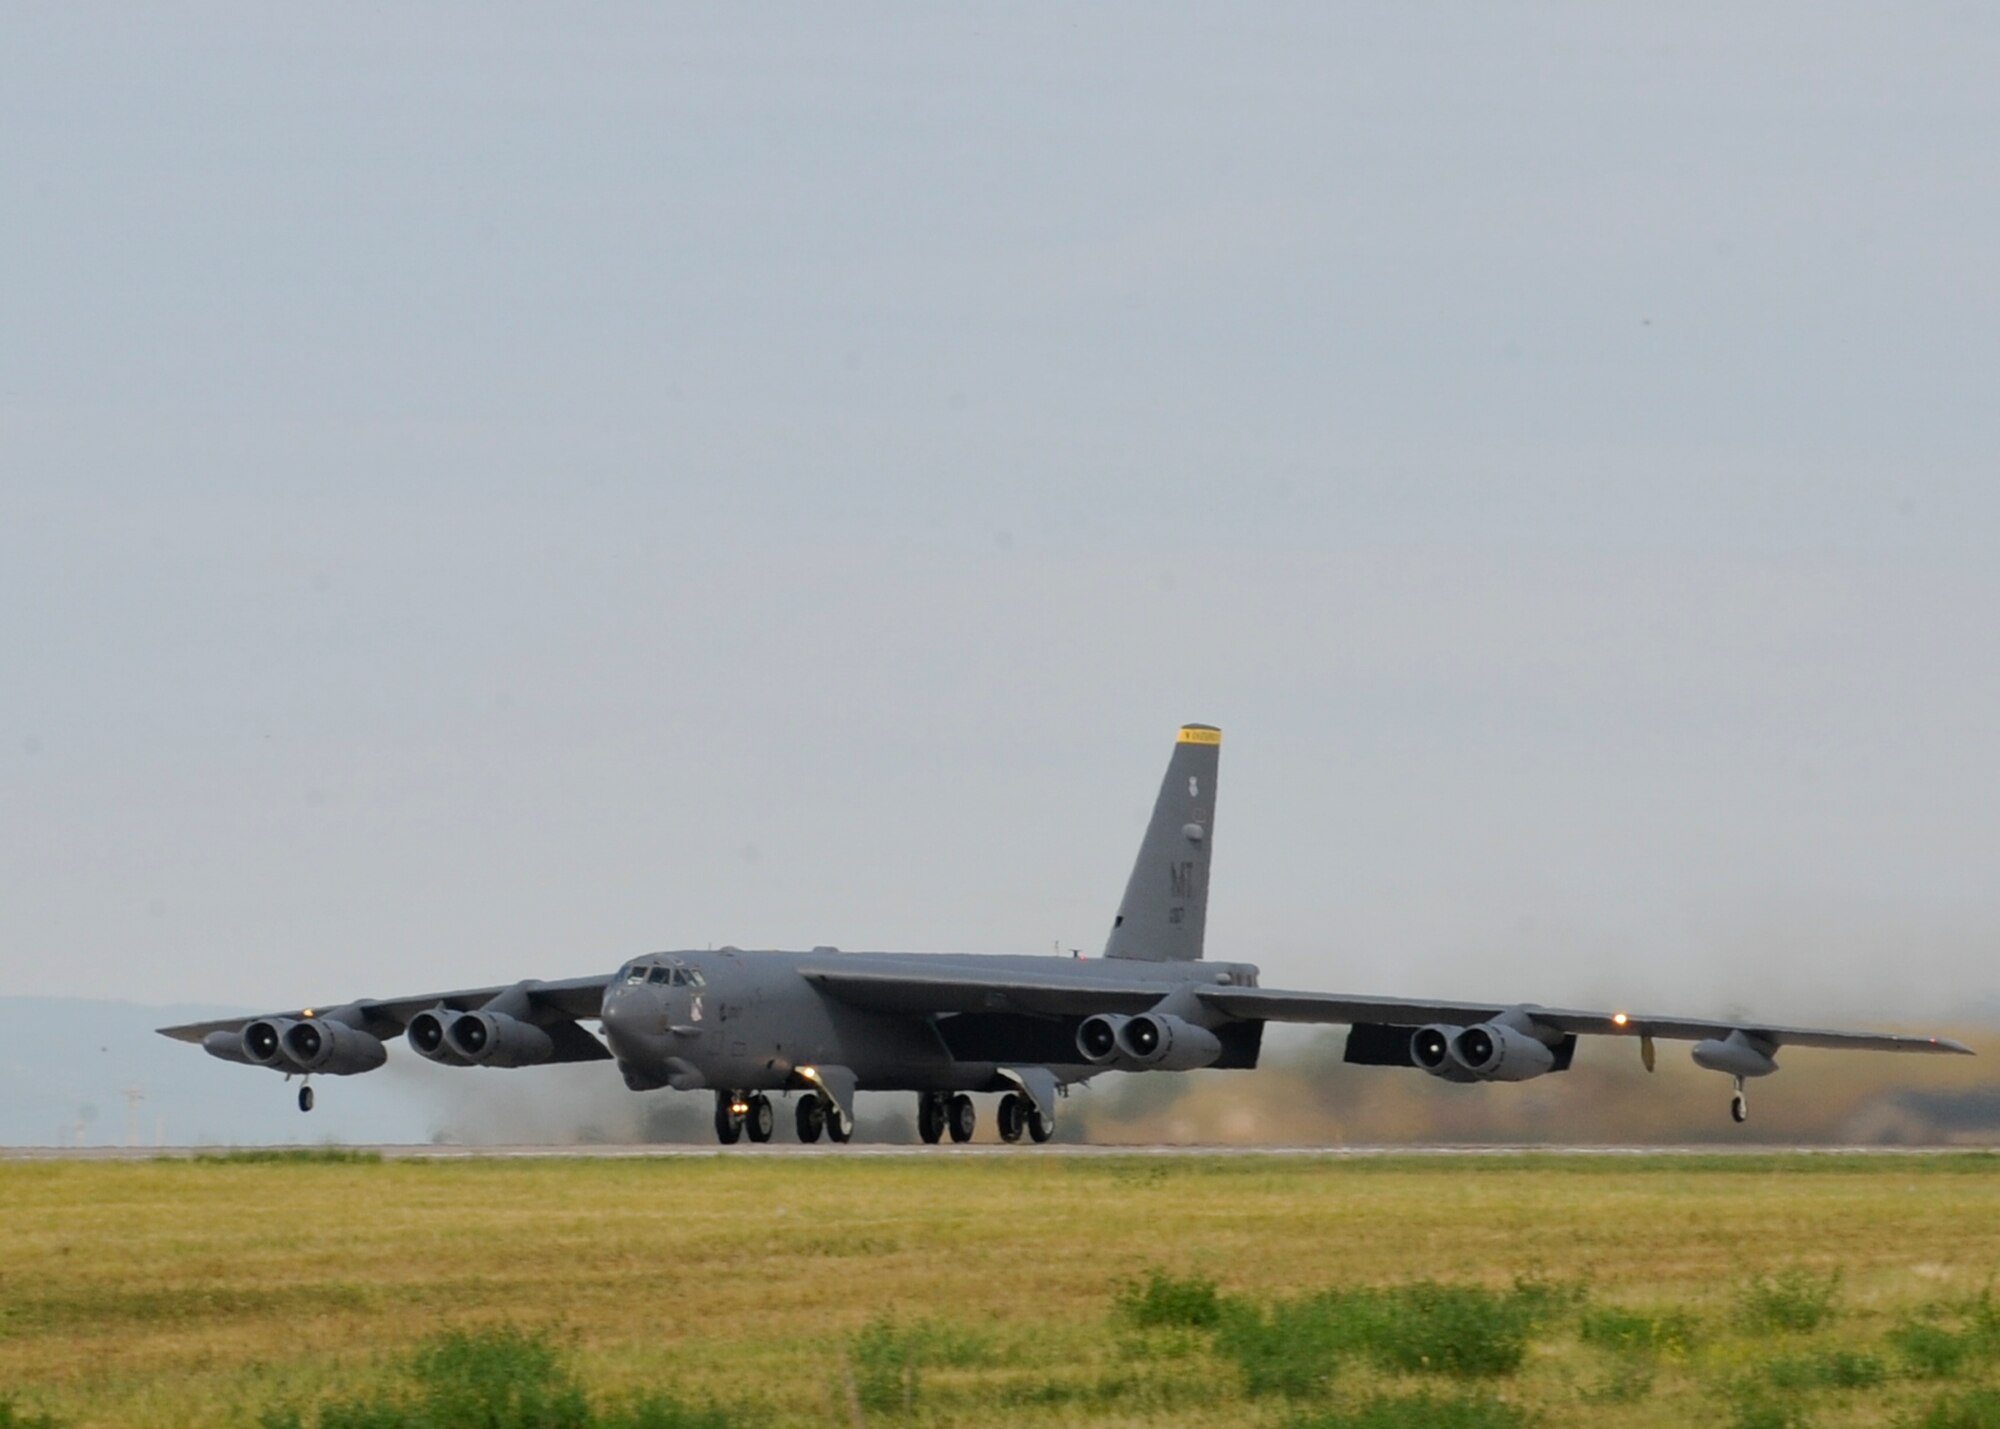 A B-52 Stratofortress takes off Aug. 14, 2014, during a standoff weapons integration training exercise at Ellsworth Air Force Base, S.D. The week-long training consisted of B-52s and B-1B Lancers conducting simulated combat scenarios at the Powder River Training Complex, S.D. to help prepare for real-world contingencies. The B-52 is from Minot Air Force Base, N.D. (U.S. Air Force photo/Senior Airman Anania Tekurio)